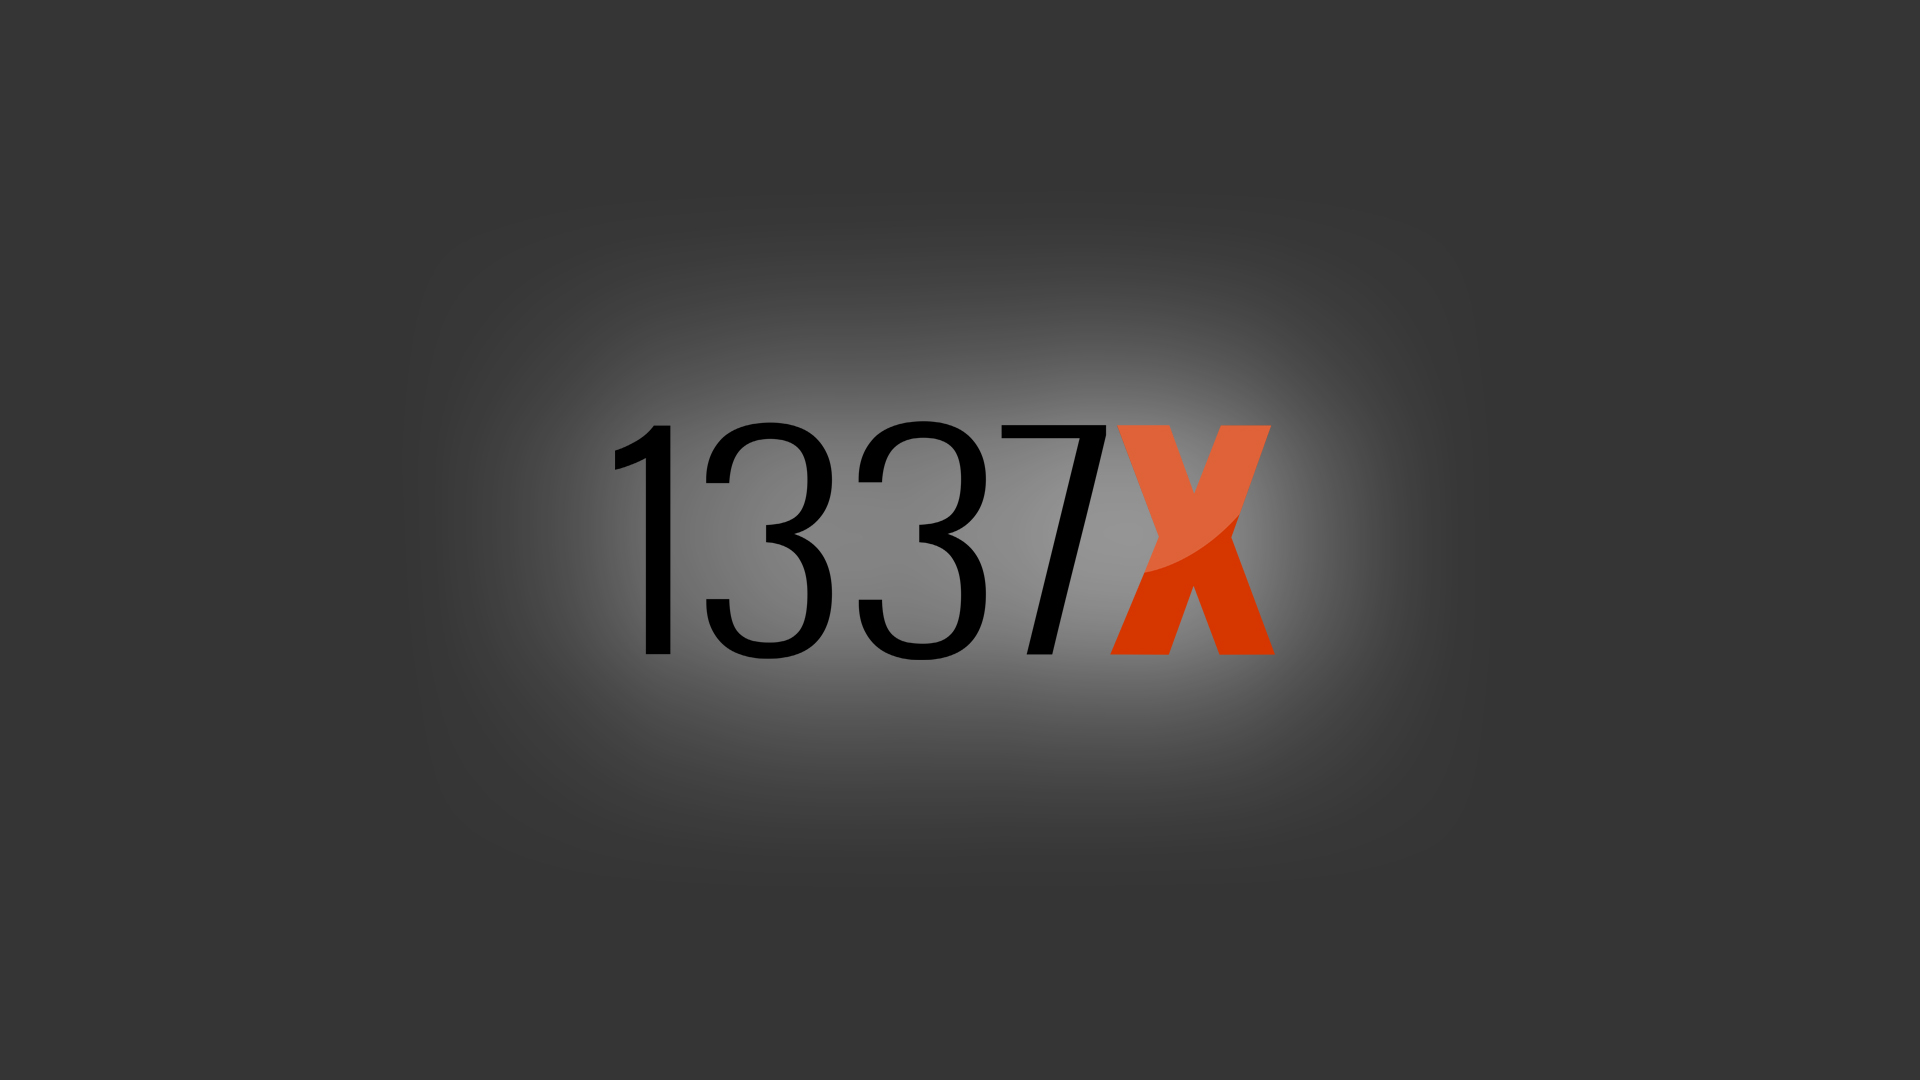 1337x.to Competitors - Top Sites Like 1337x.to